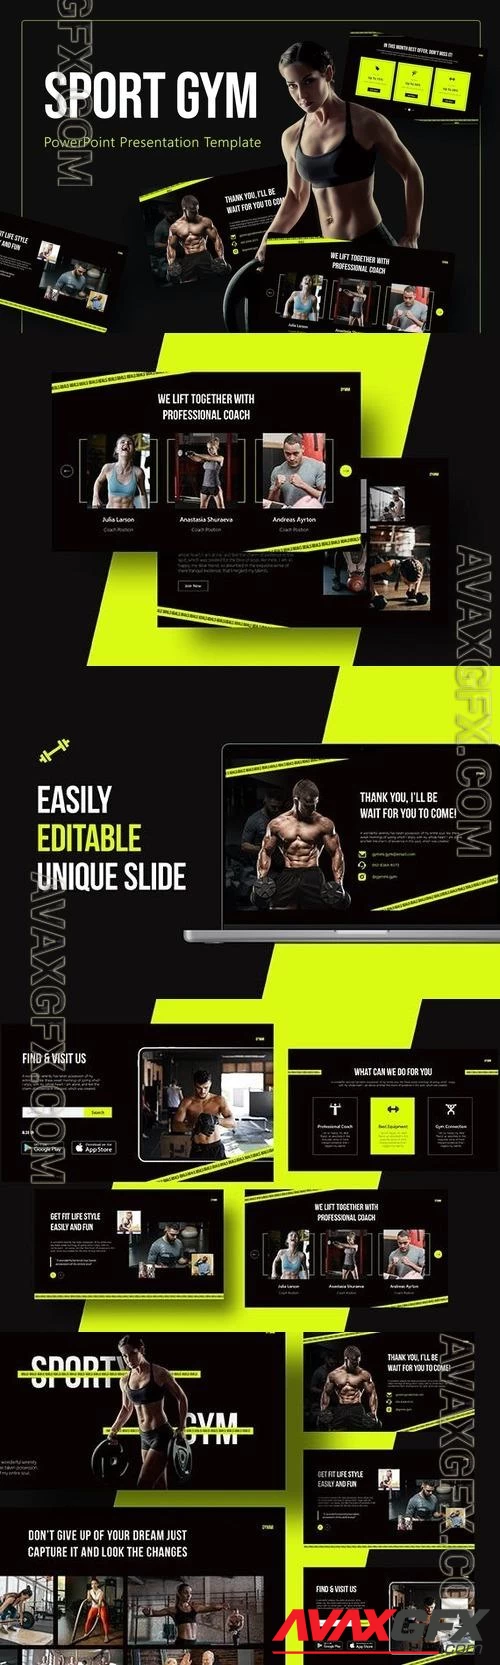 Sports Gym Powerpoint Template